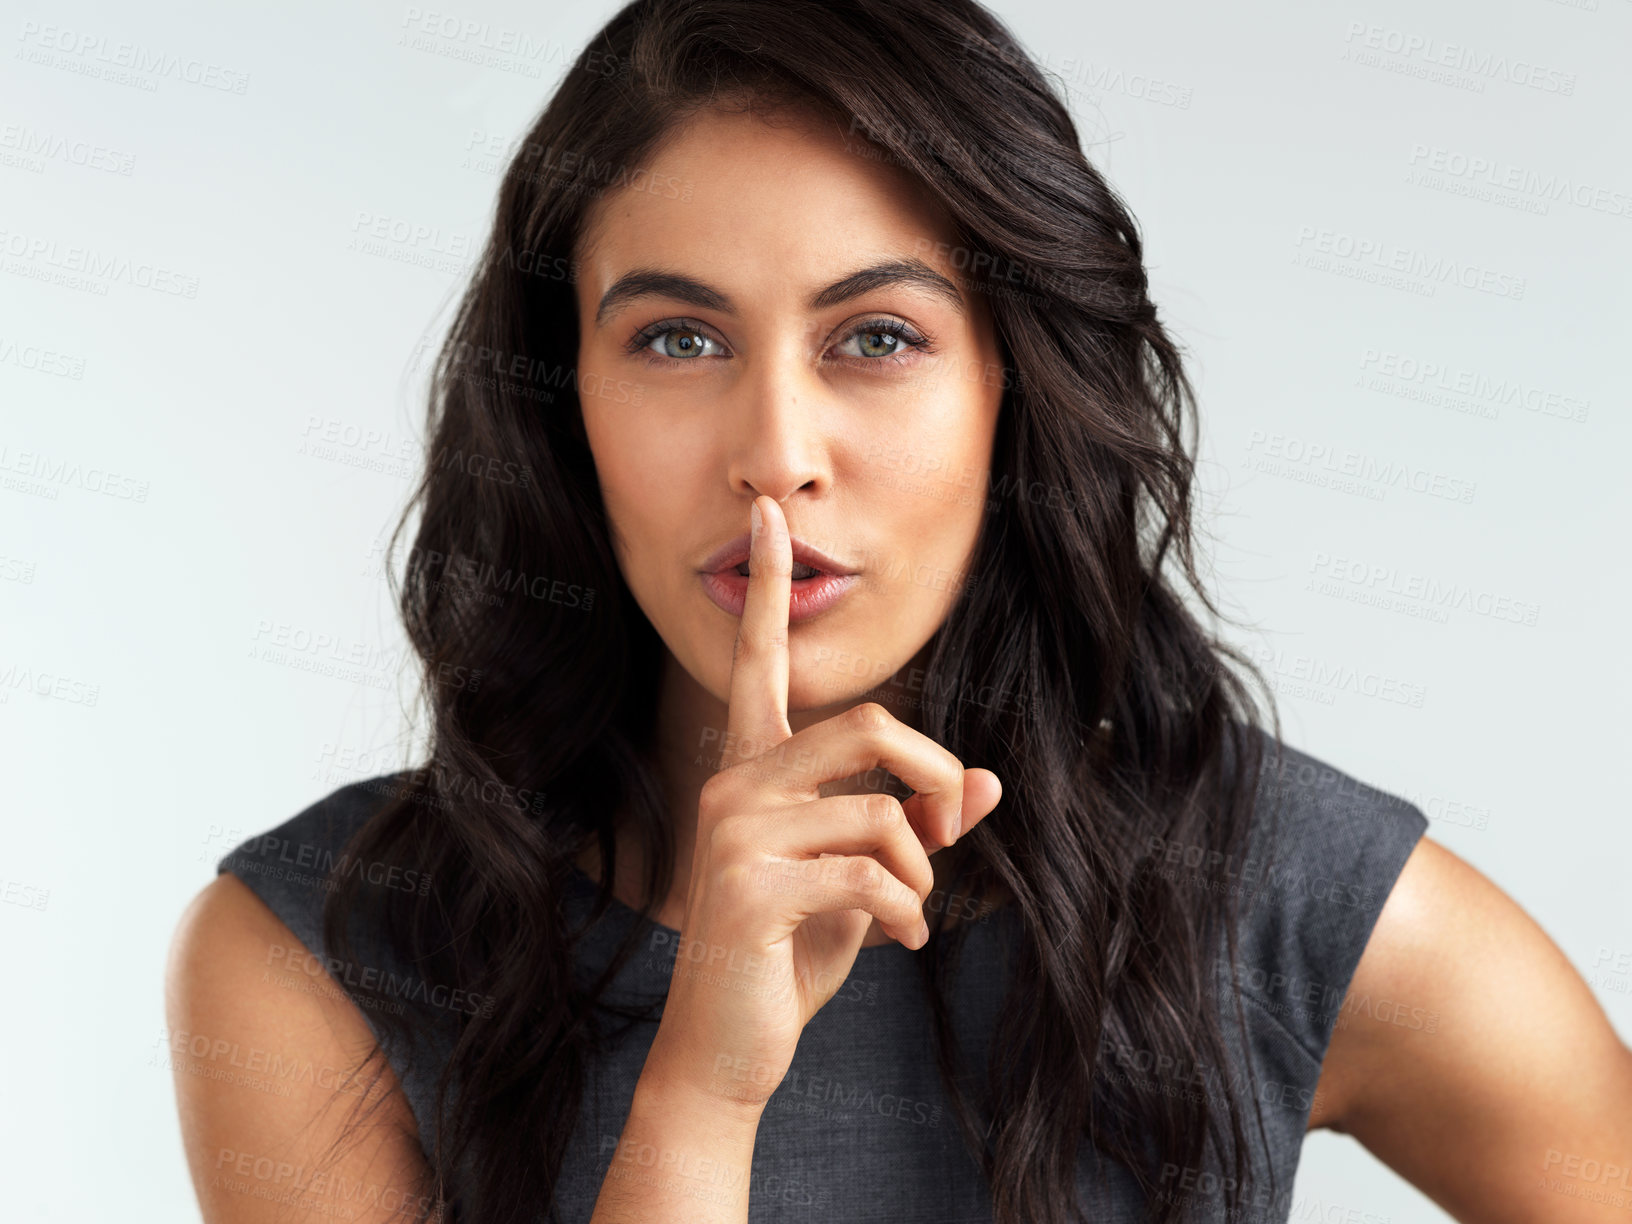 Buy stock photo Shot of a beautiful young woman posing with her finger on her lips